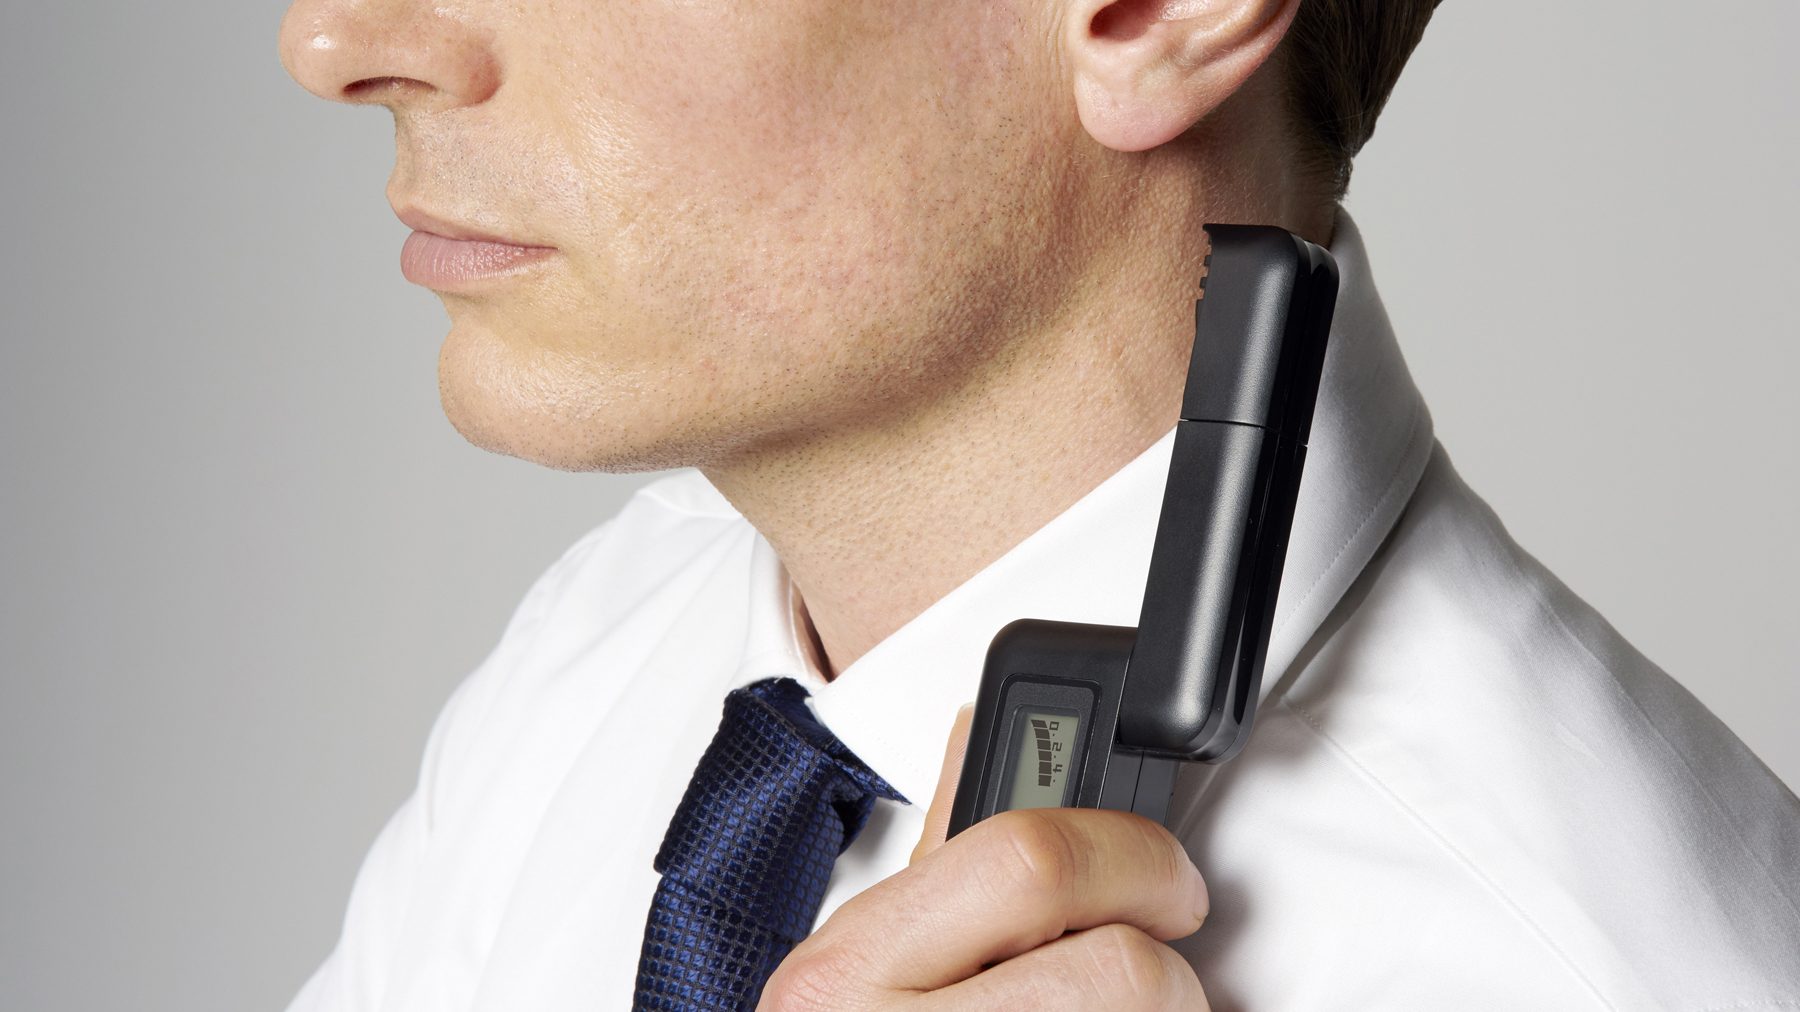 This New Handheld Device Detects Your Smelly Body Odour Before Your Co-Workers Do